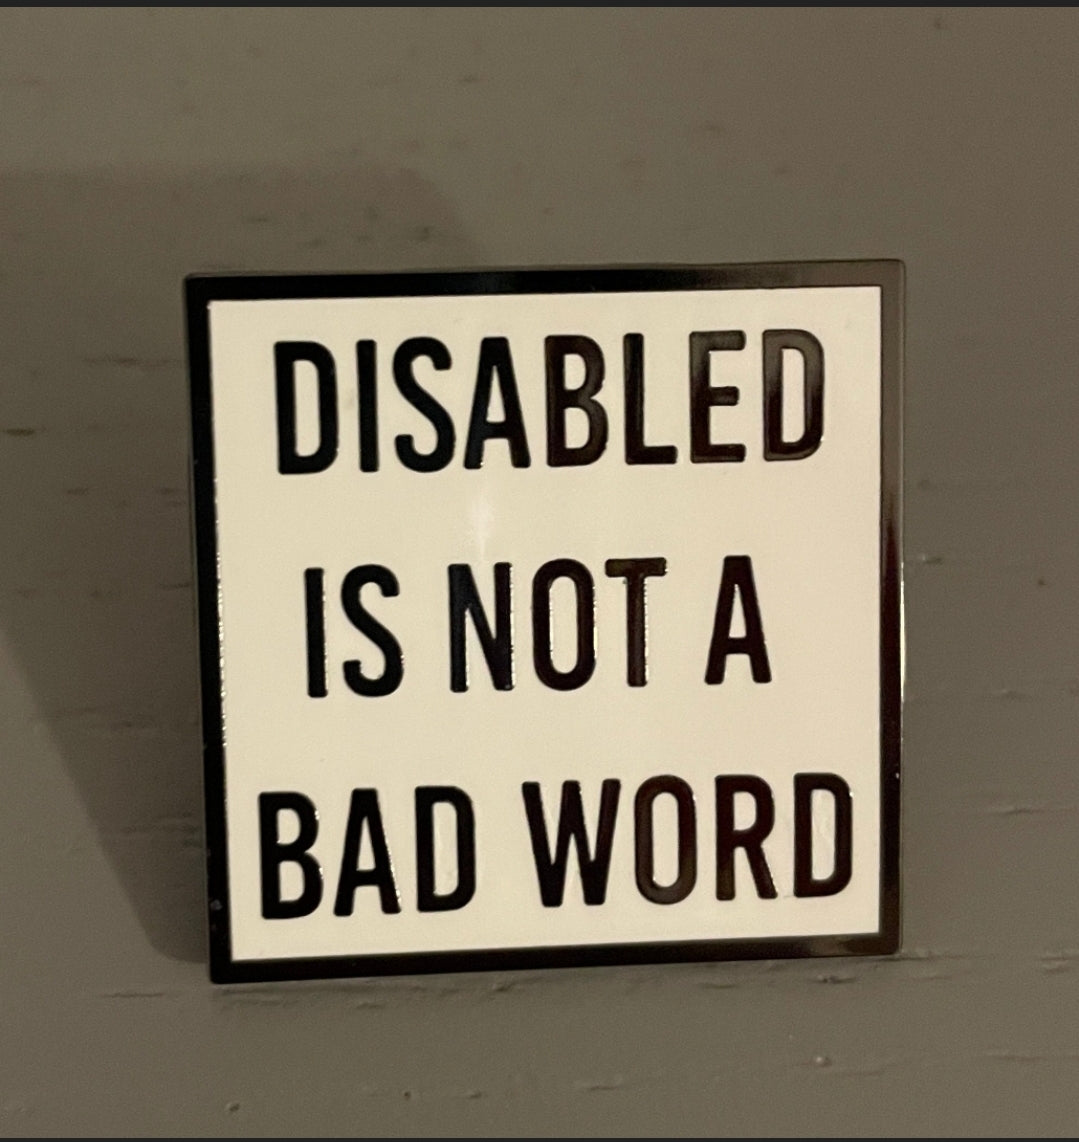 Disabled Is Not a Bad Word Pin